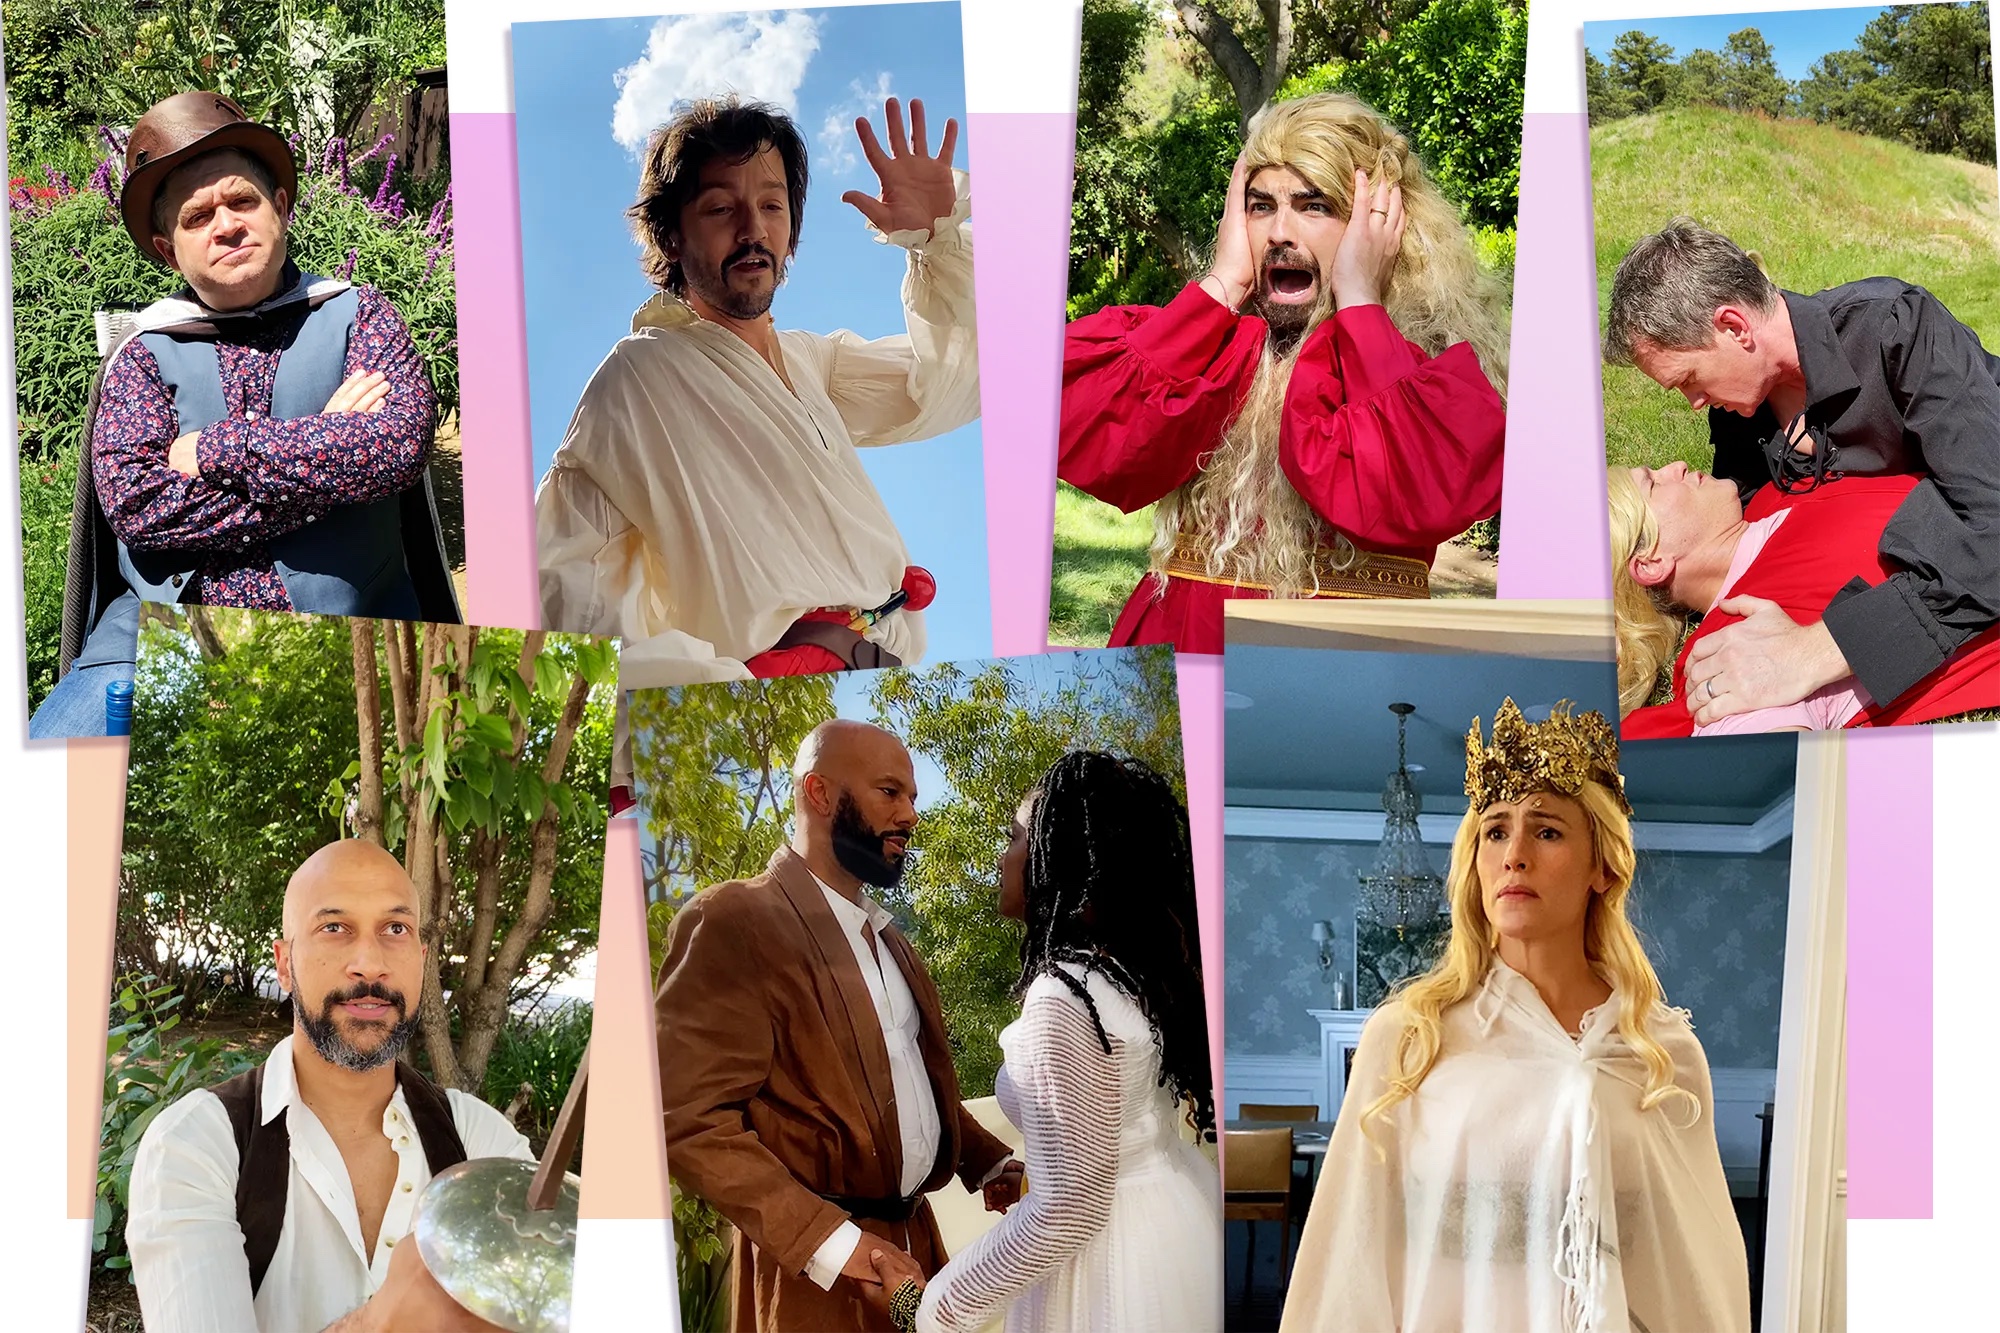 Bored Celebs Recreated ‘The Princess Bride’ While In Lockdown. This is AMAZING!